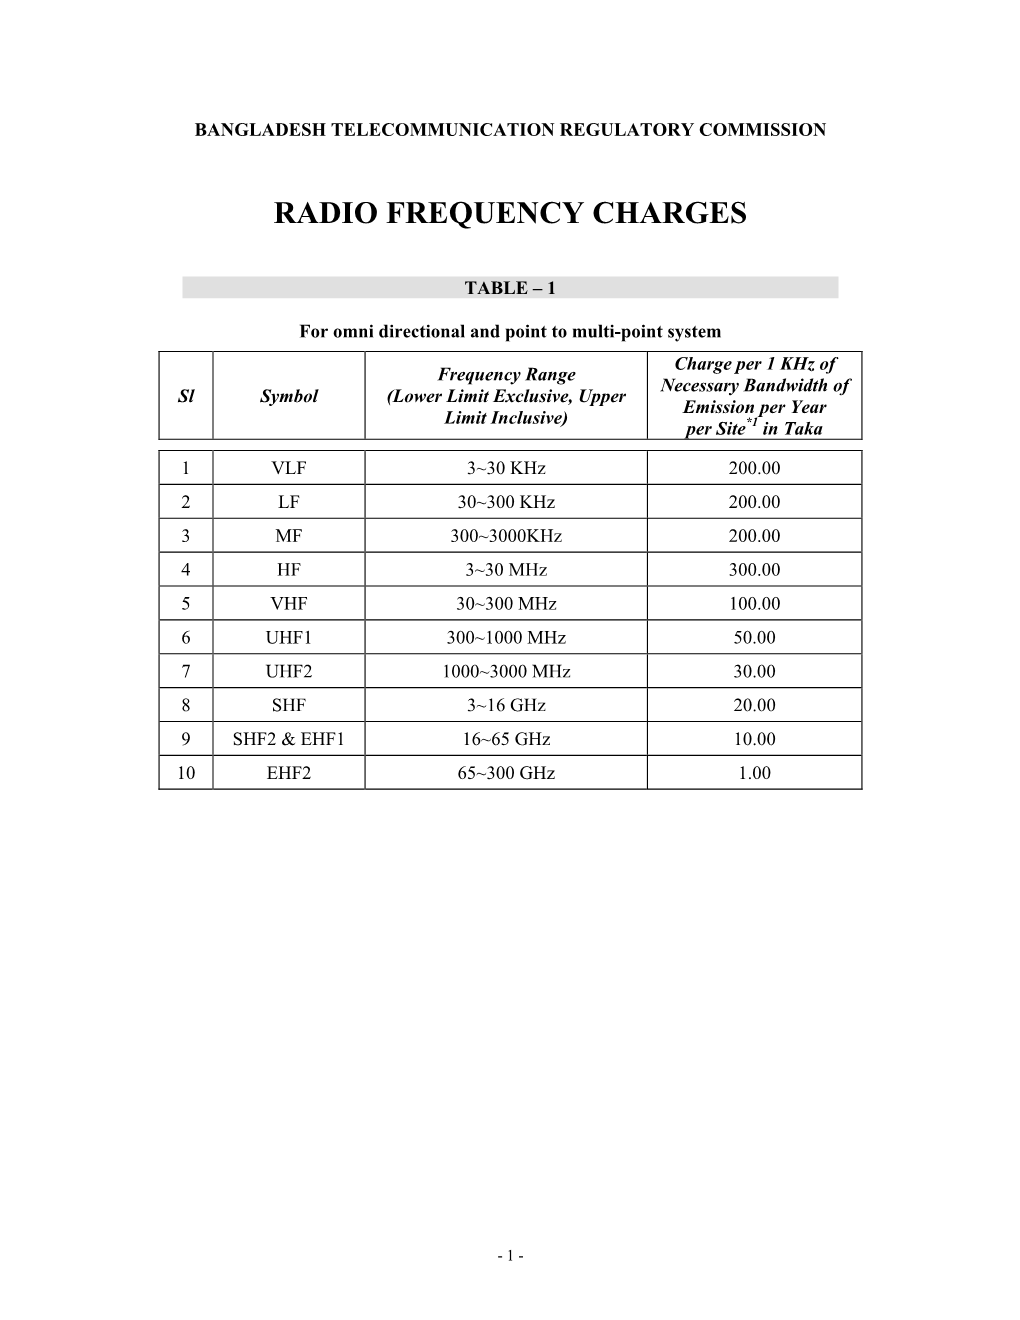 Radio Frequency Charges